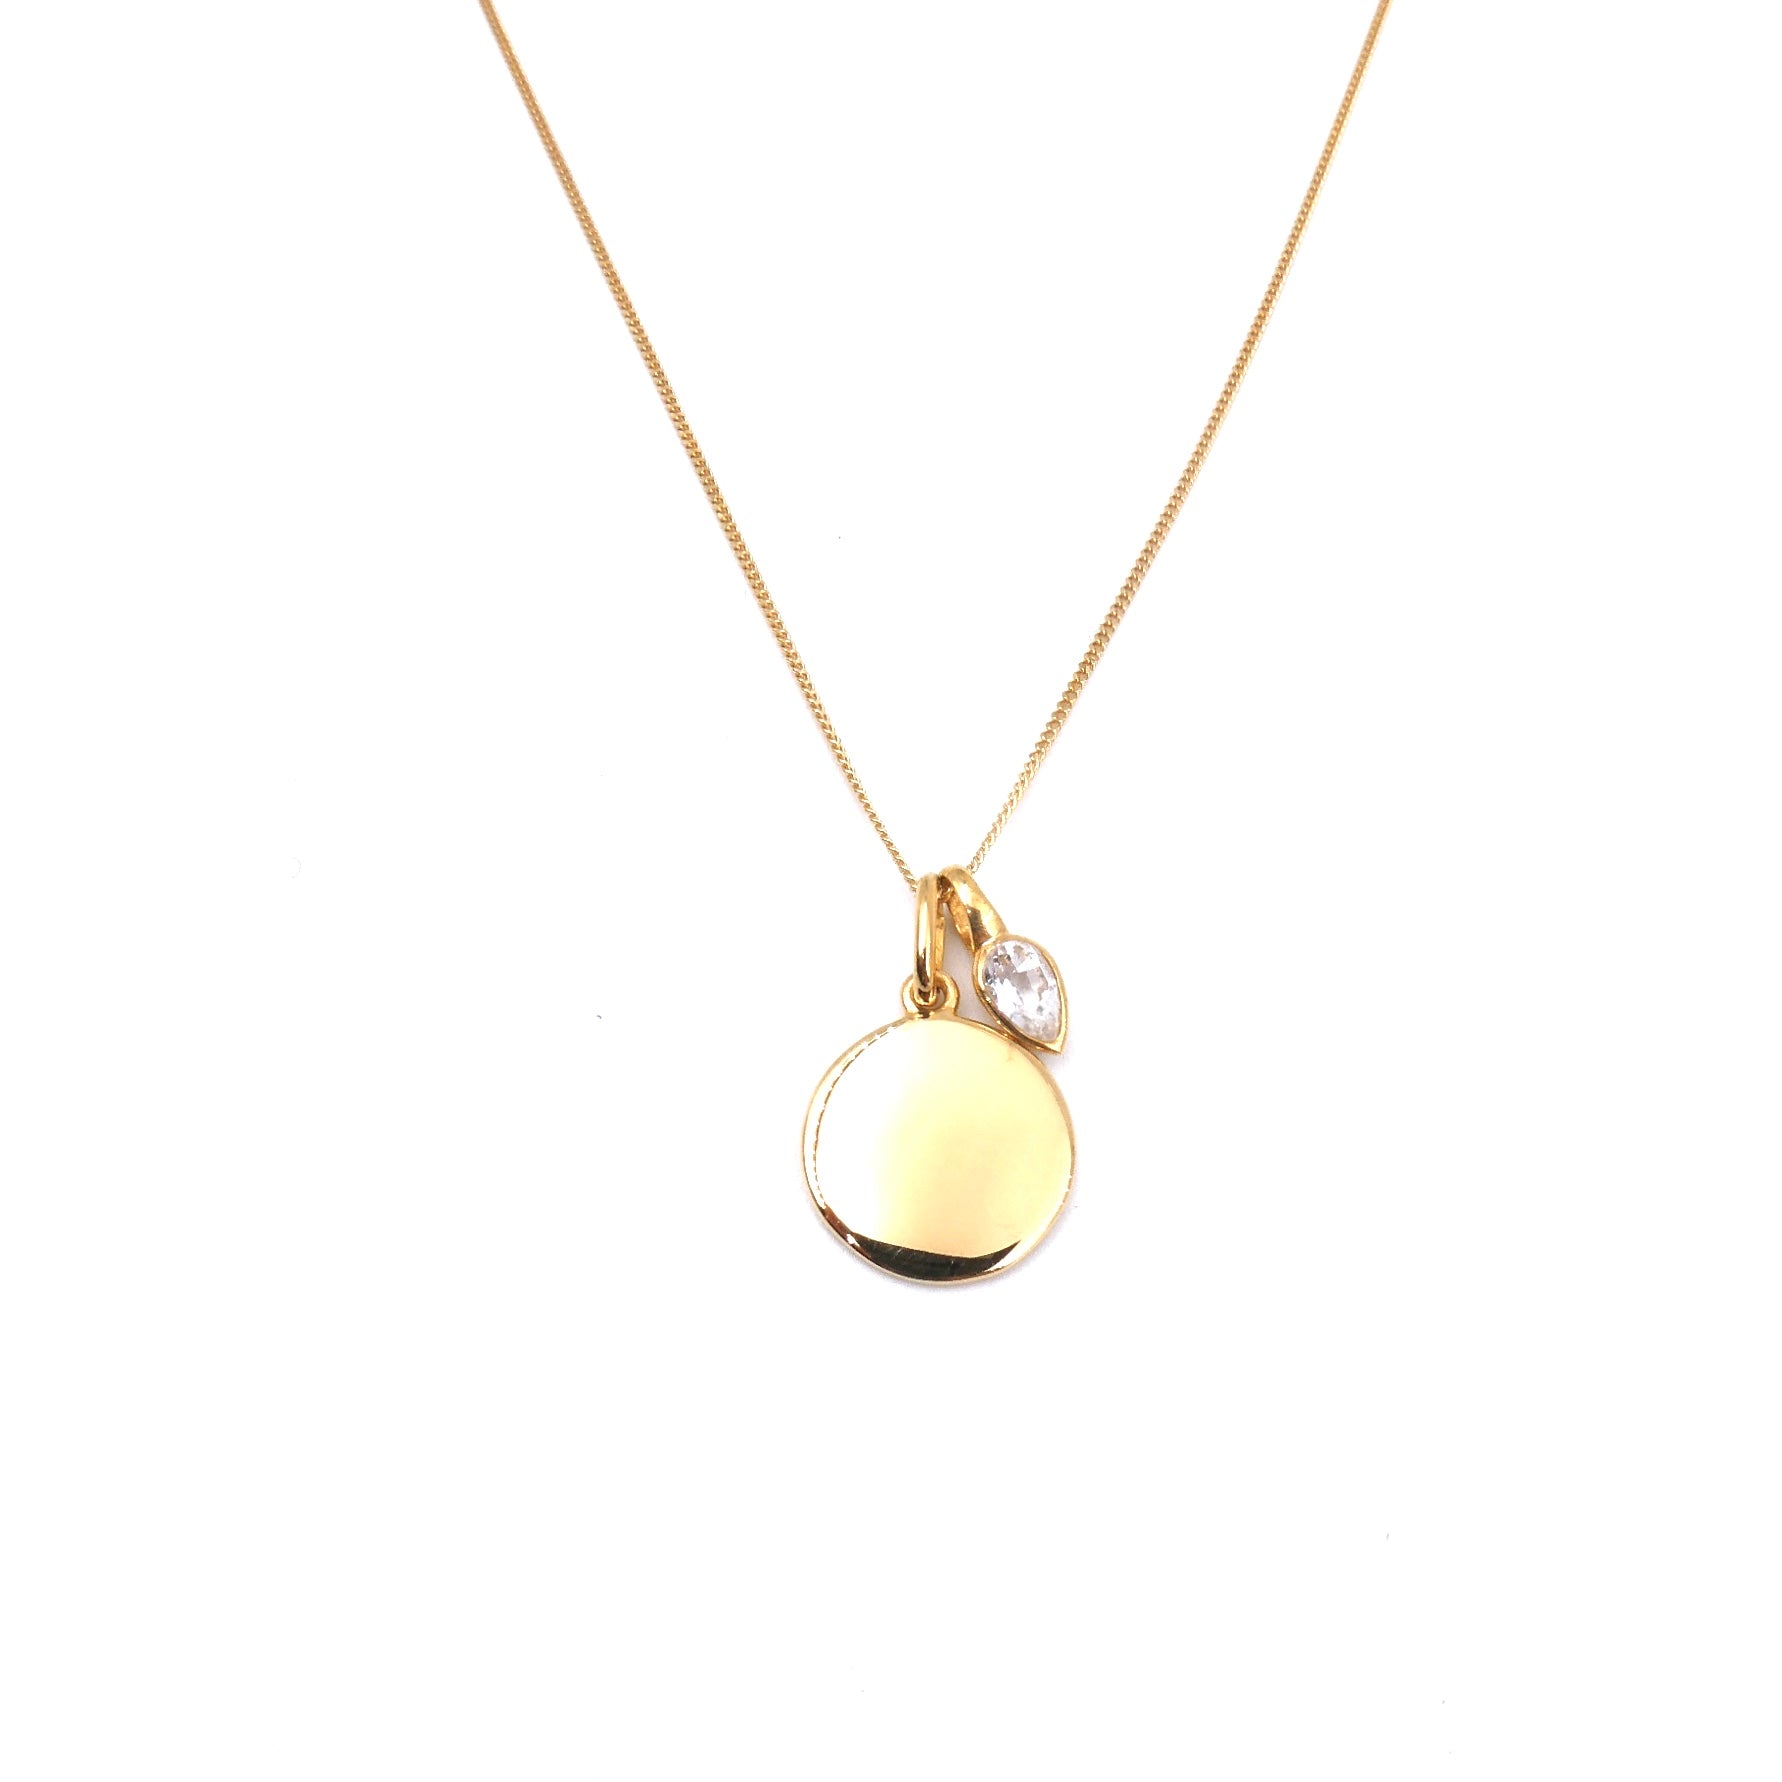 Gold plated pendant with a white topaz drop on a fine chain, White topaz for April. - Collected